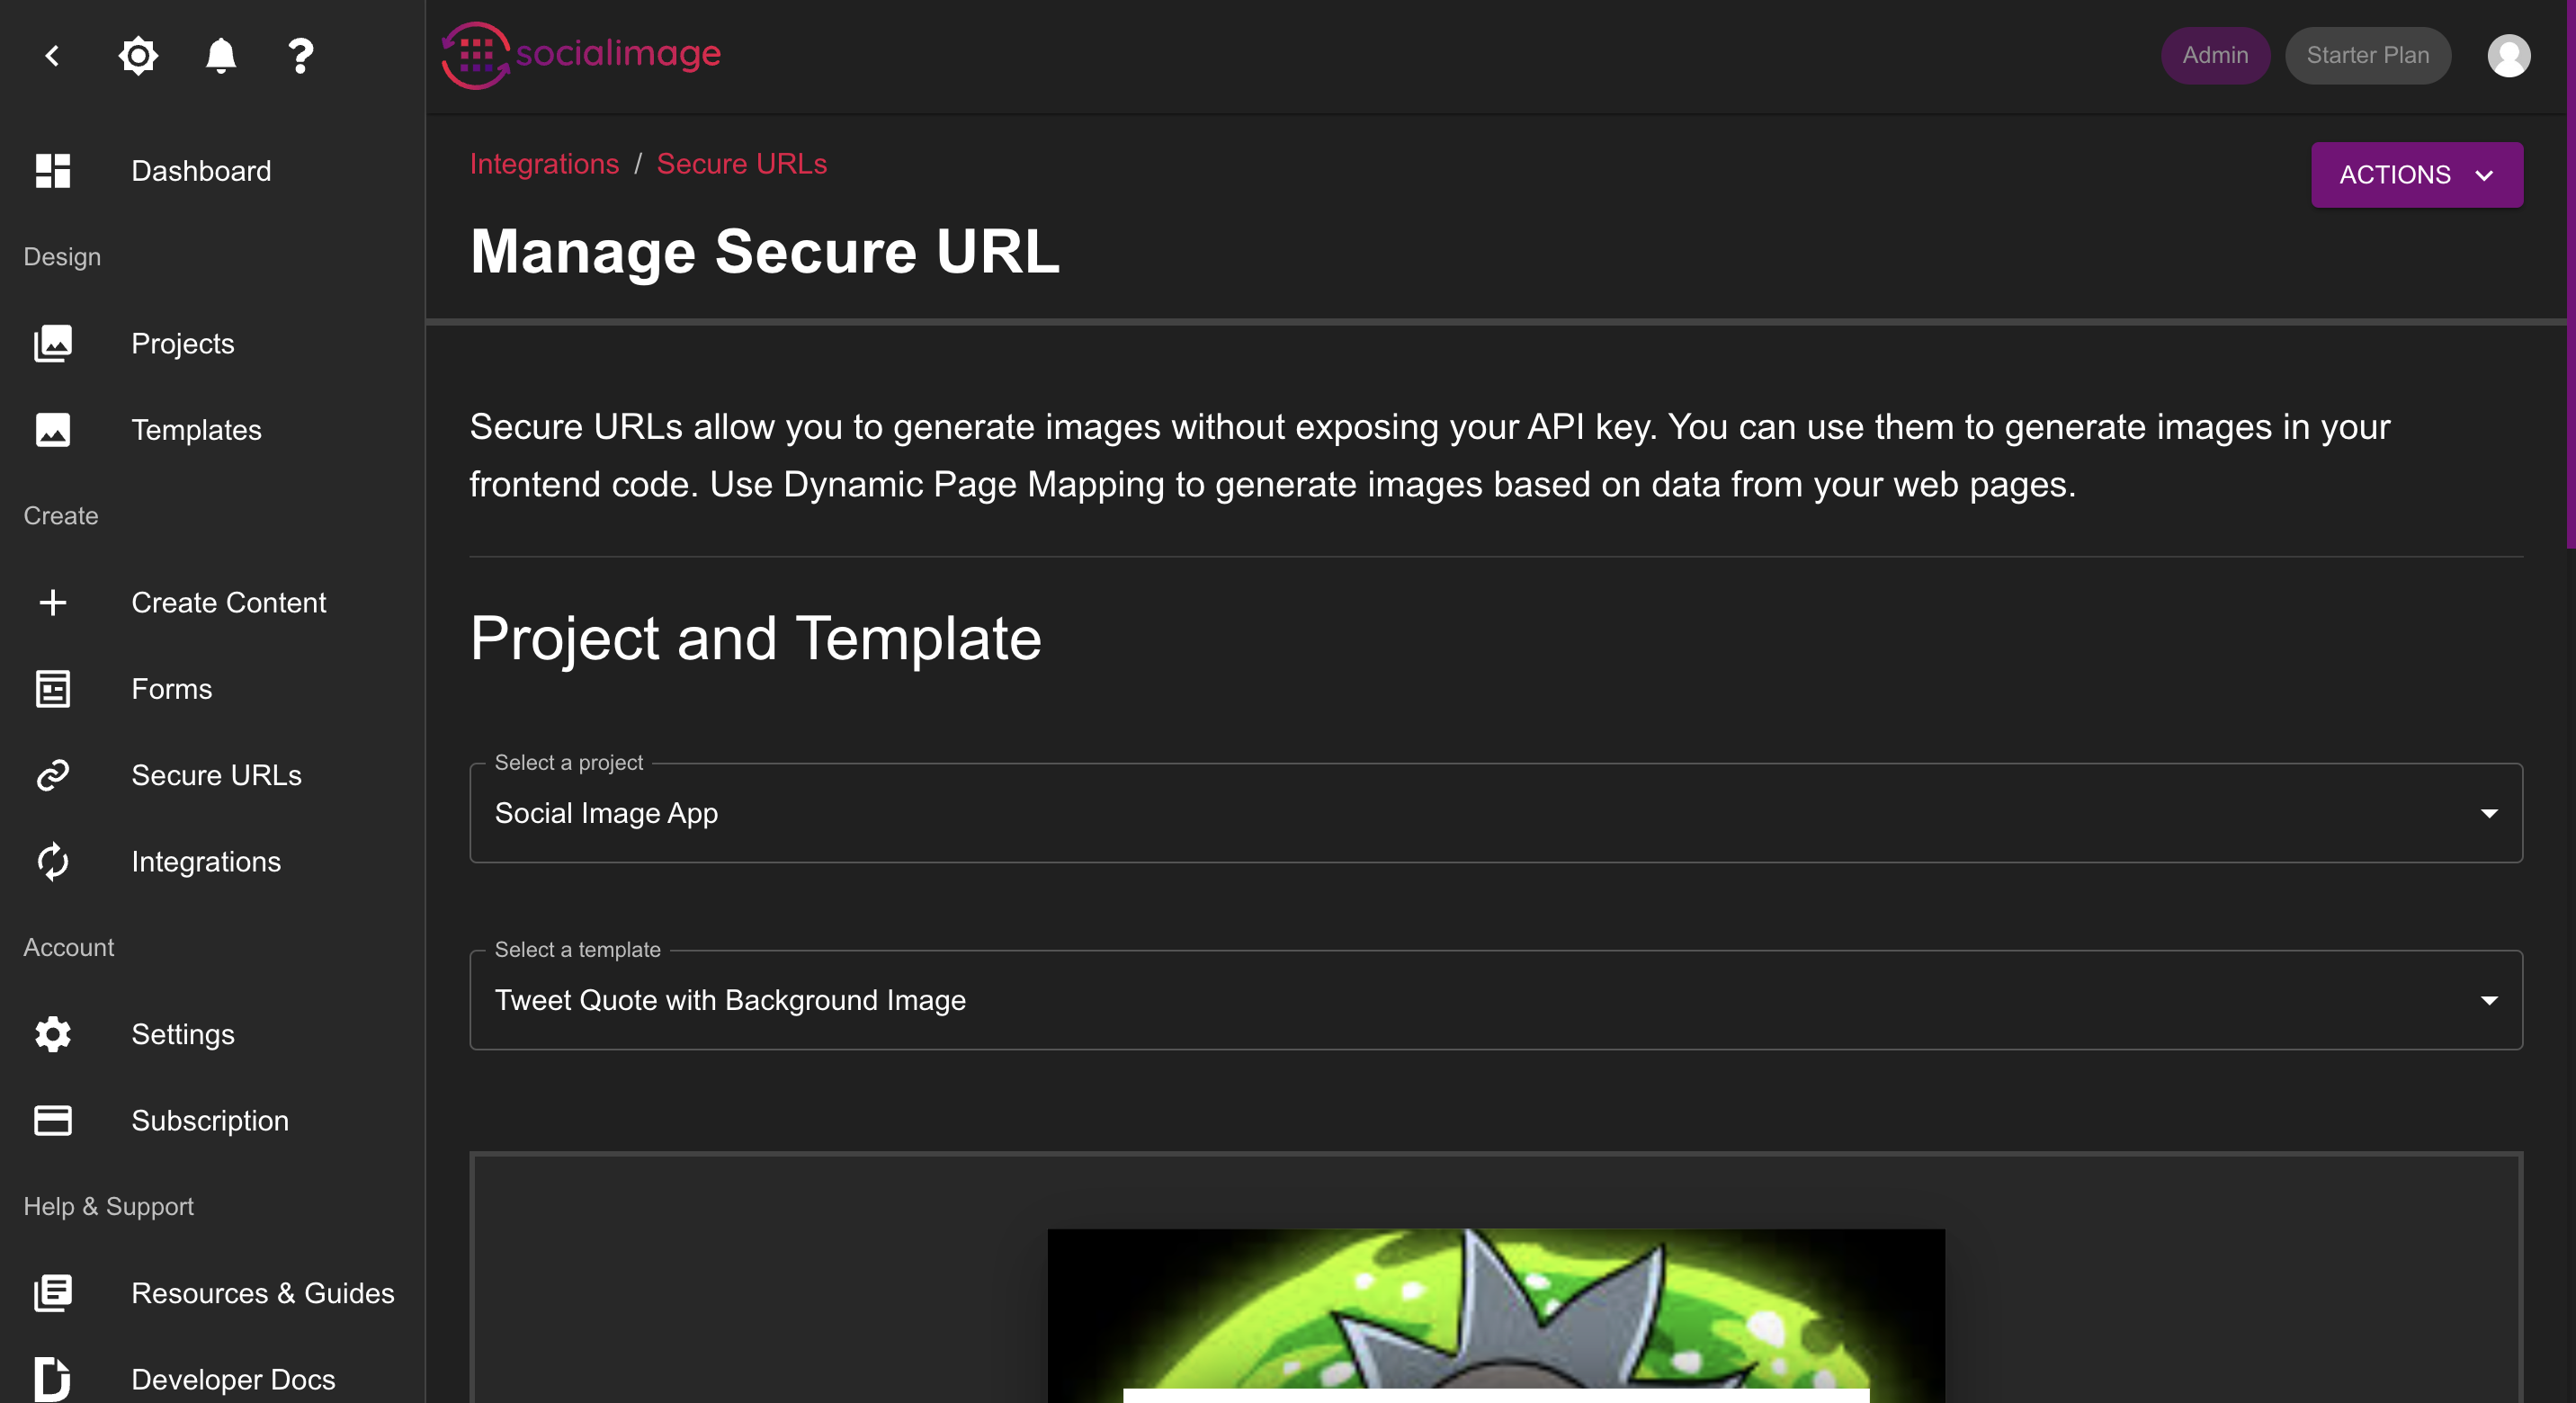 Create pre-signed secure URLs to generate images on demand without sharing your API key